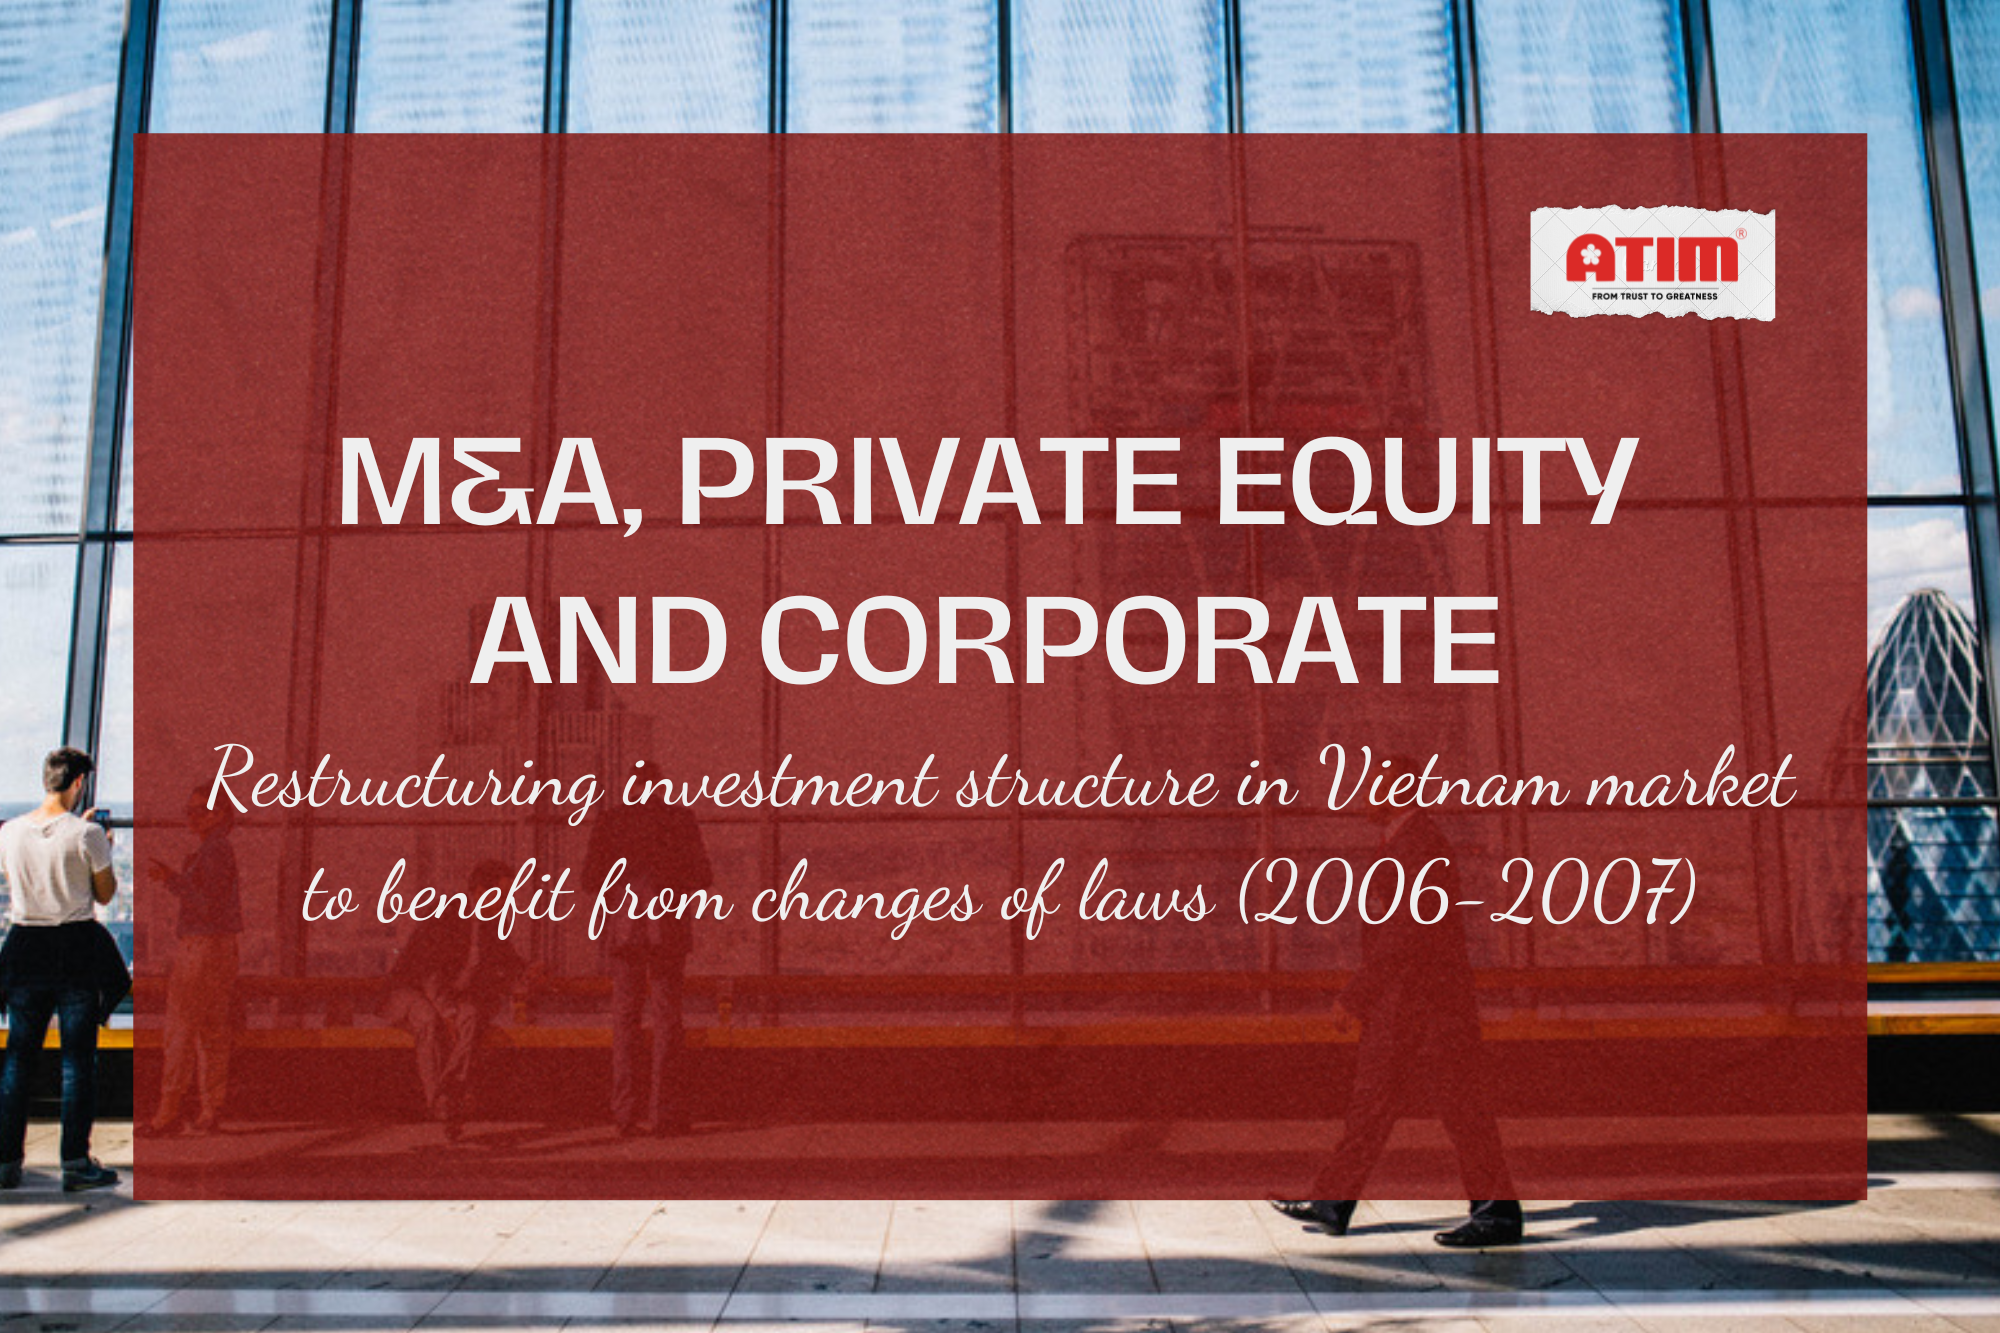 M&A, Private Equity and Corporate - Restructuring investment structure in Vietnam market to benefit from changes of laws